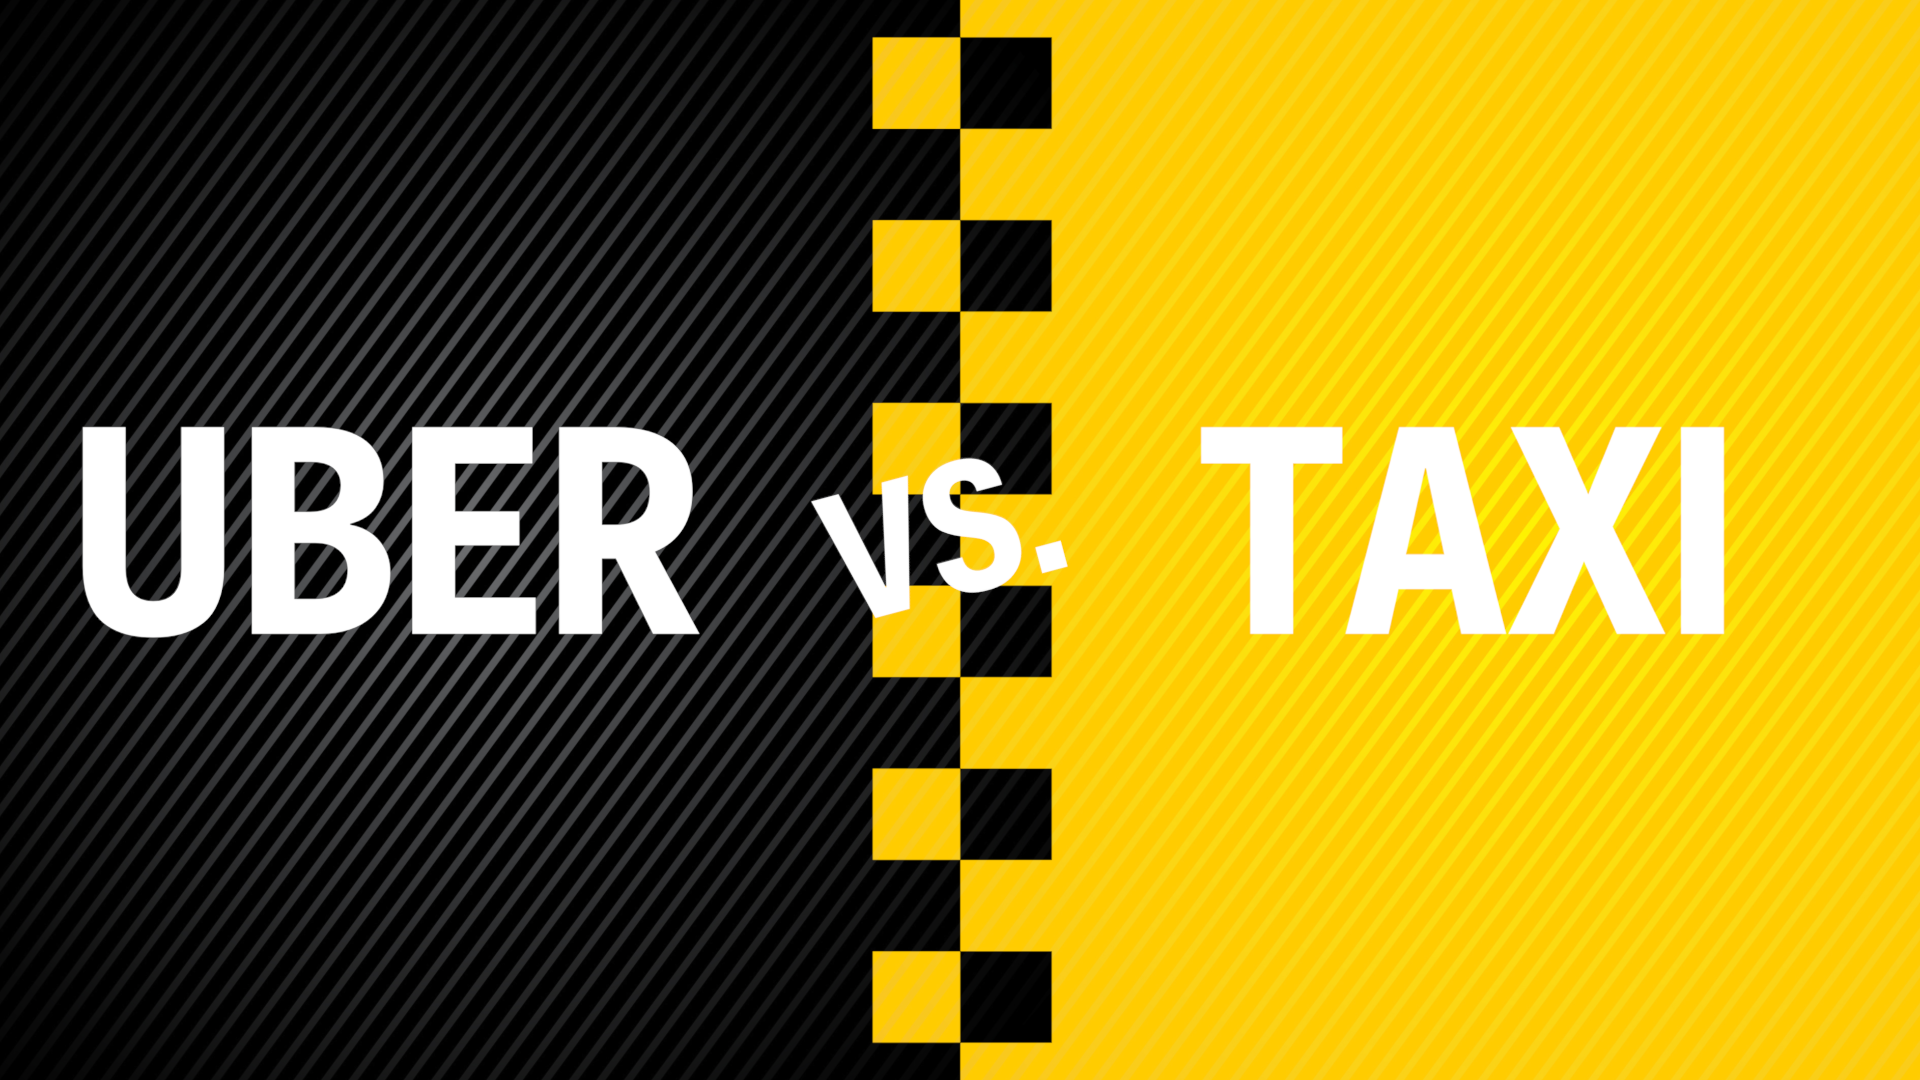 Will the Taxi industry land a blow against Uber?